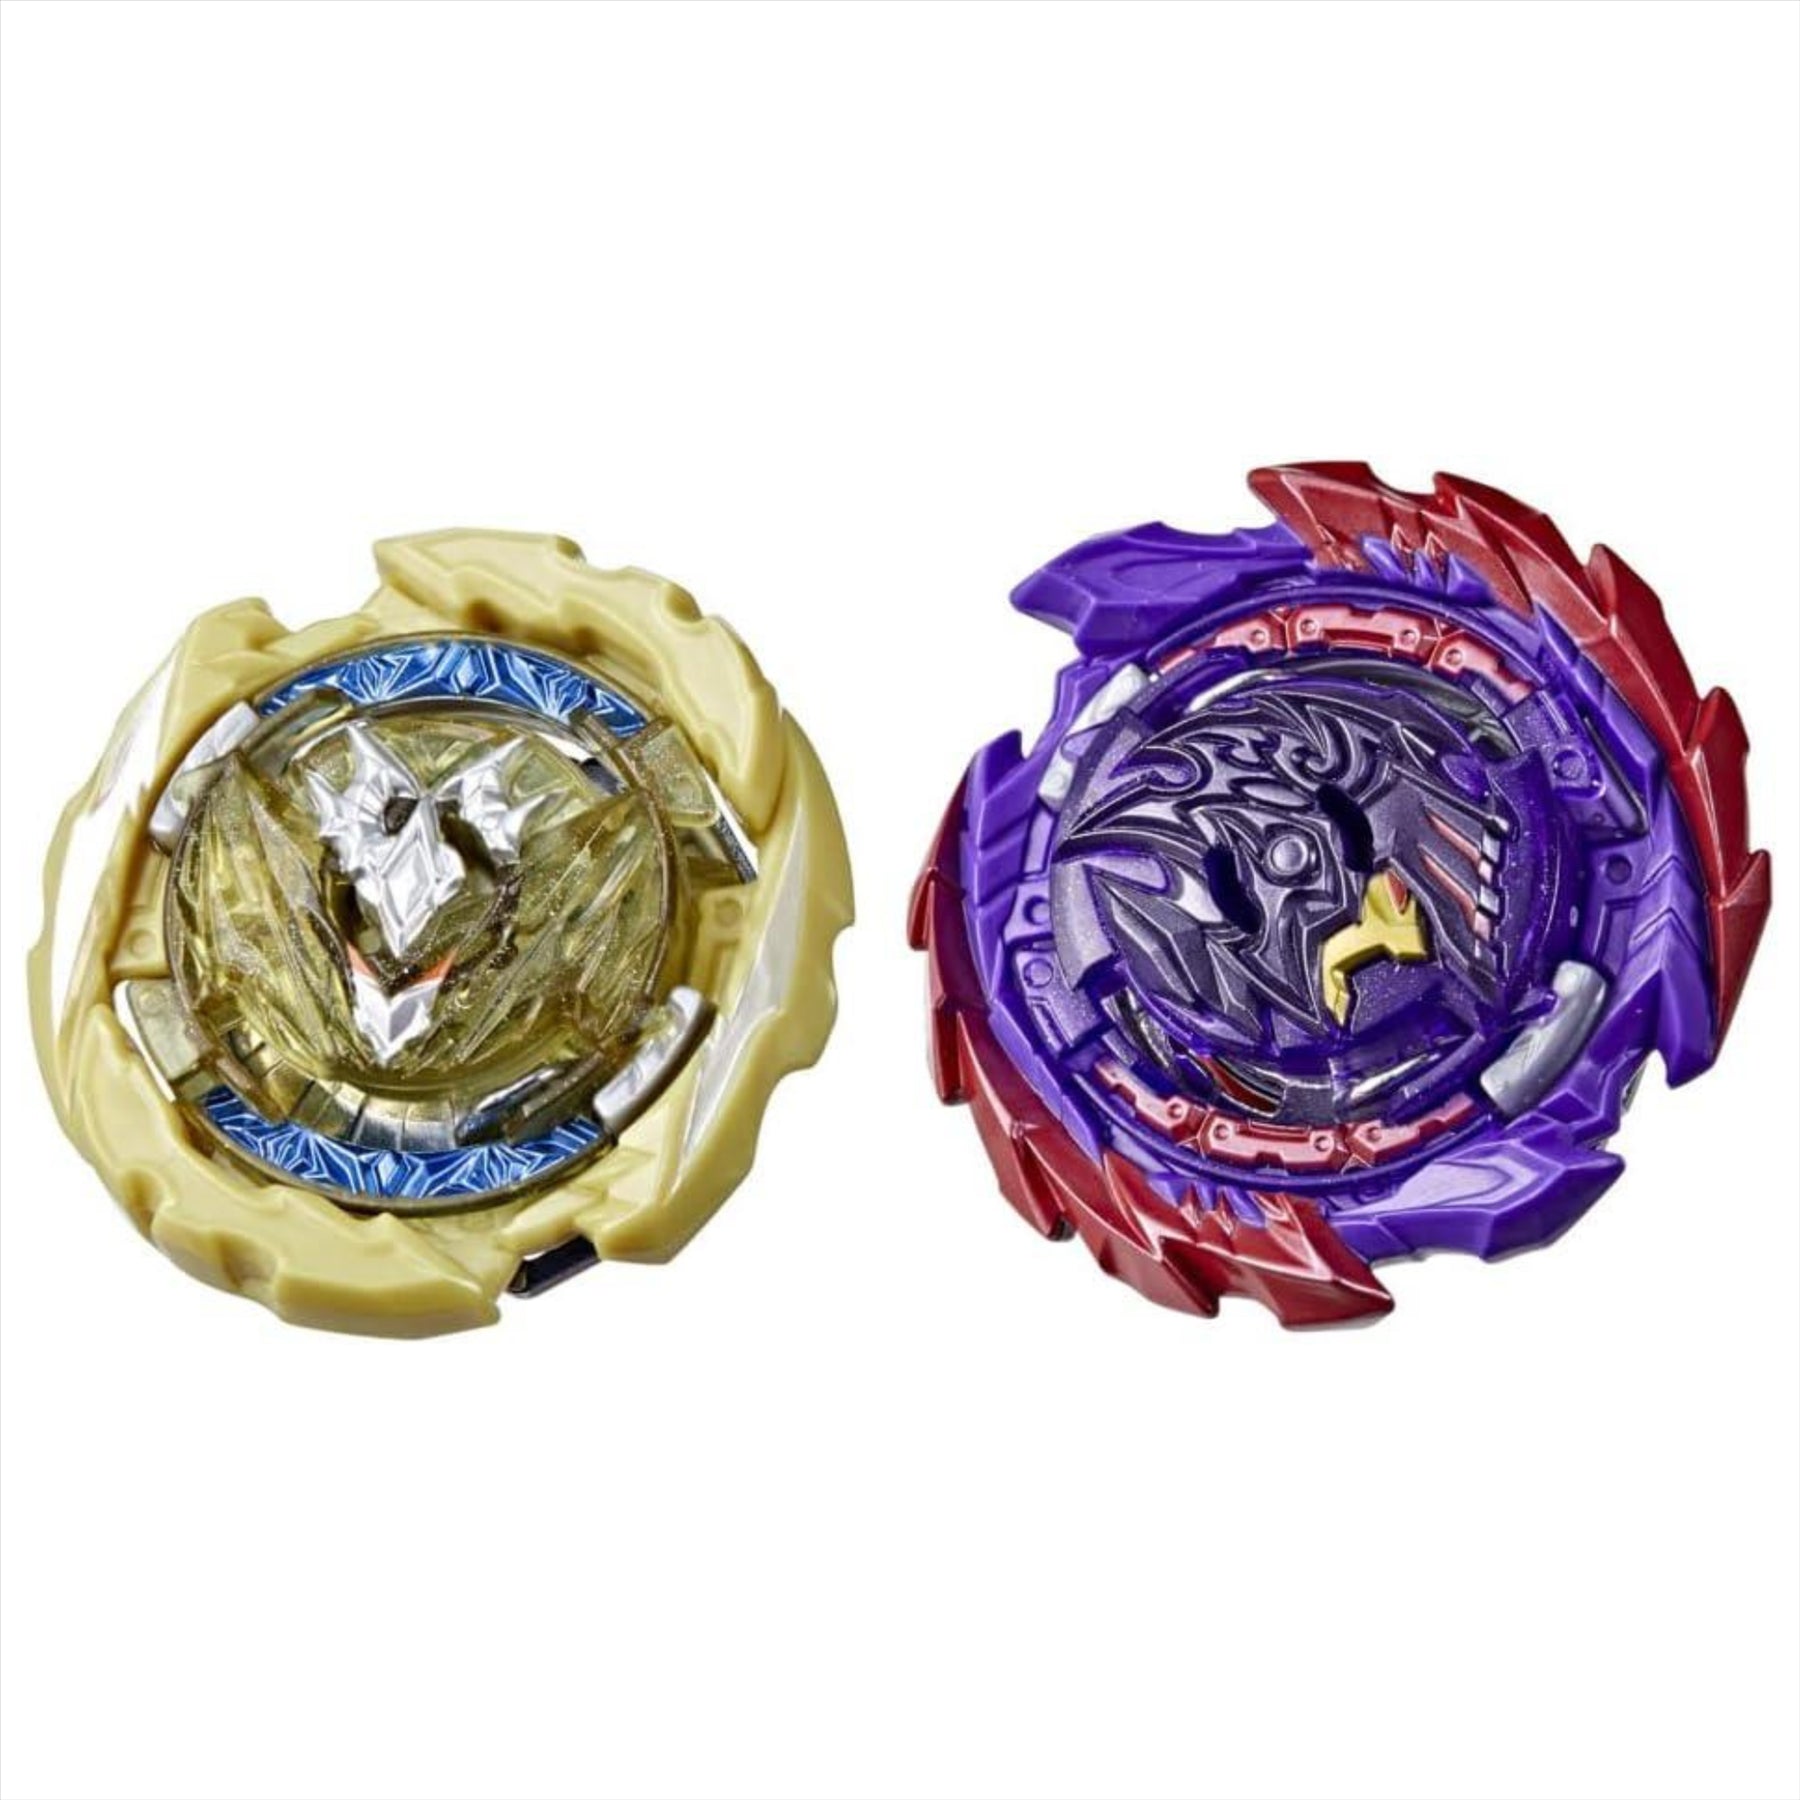 Hasbro Beyblade Burst QuadDrive, Pack of 2 Competition Spinners Berserk Balderov B7 and Cyclone Belfyre B7, Toy for Kids, Ages 8 and Up - Toptoys2u